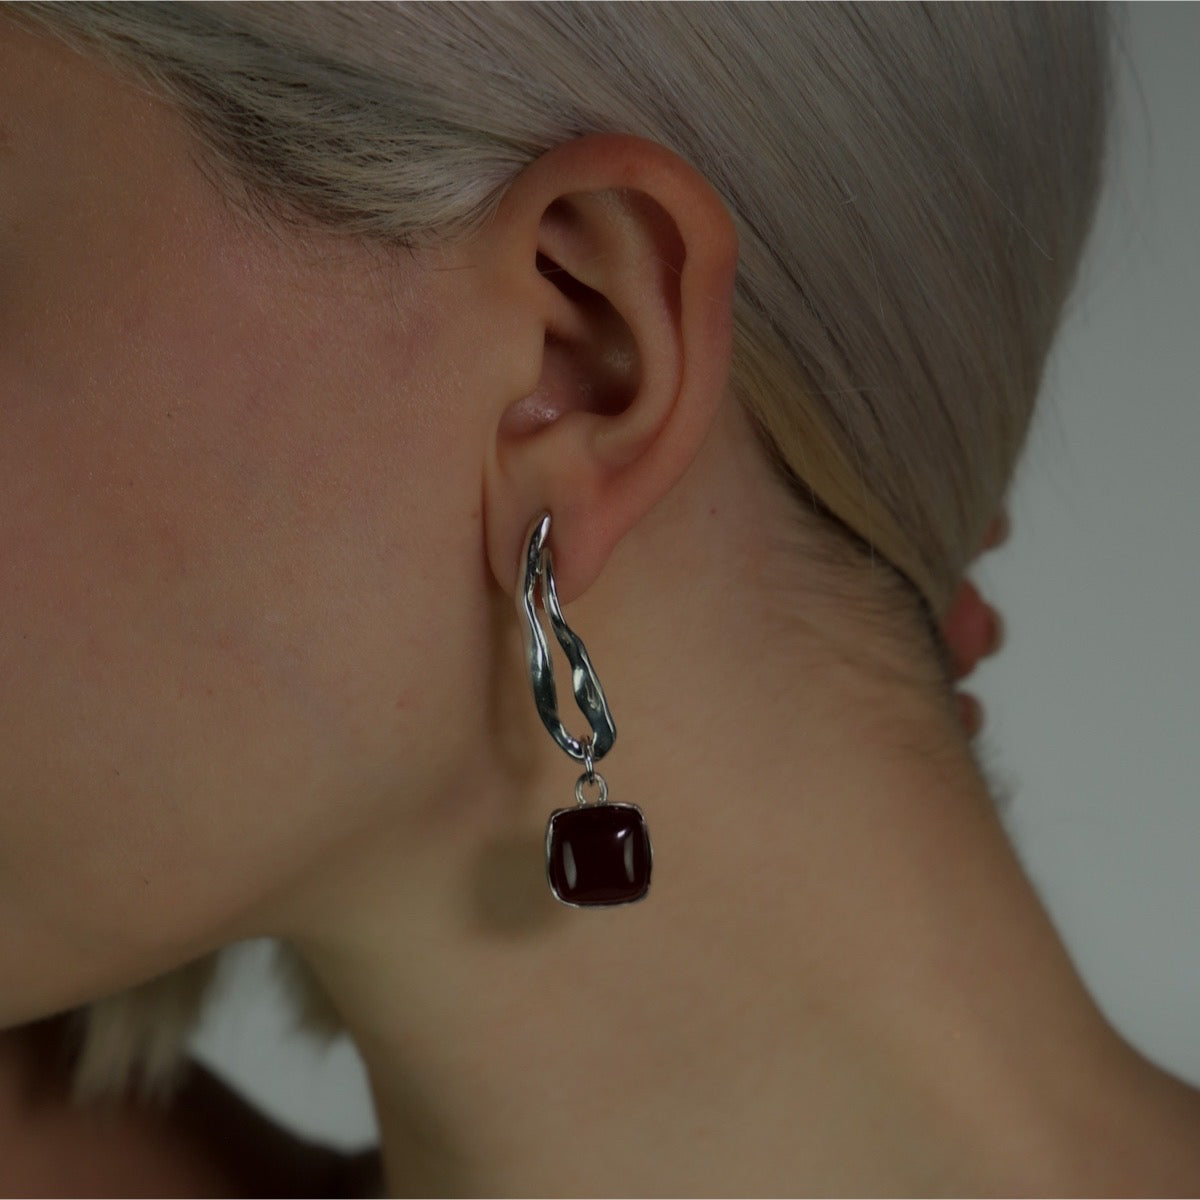 Handmade earrings crafted from sterling silver 925 with a semi-precious stone